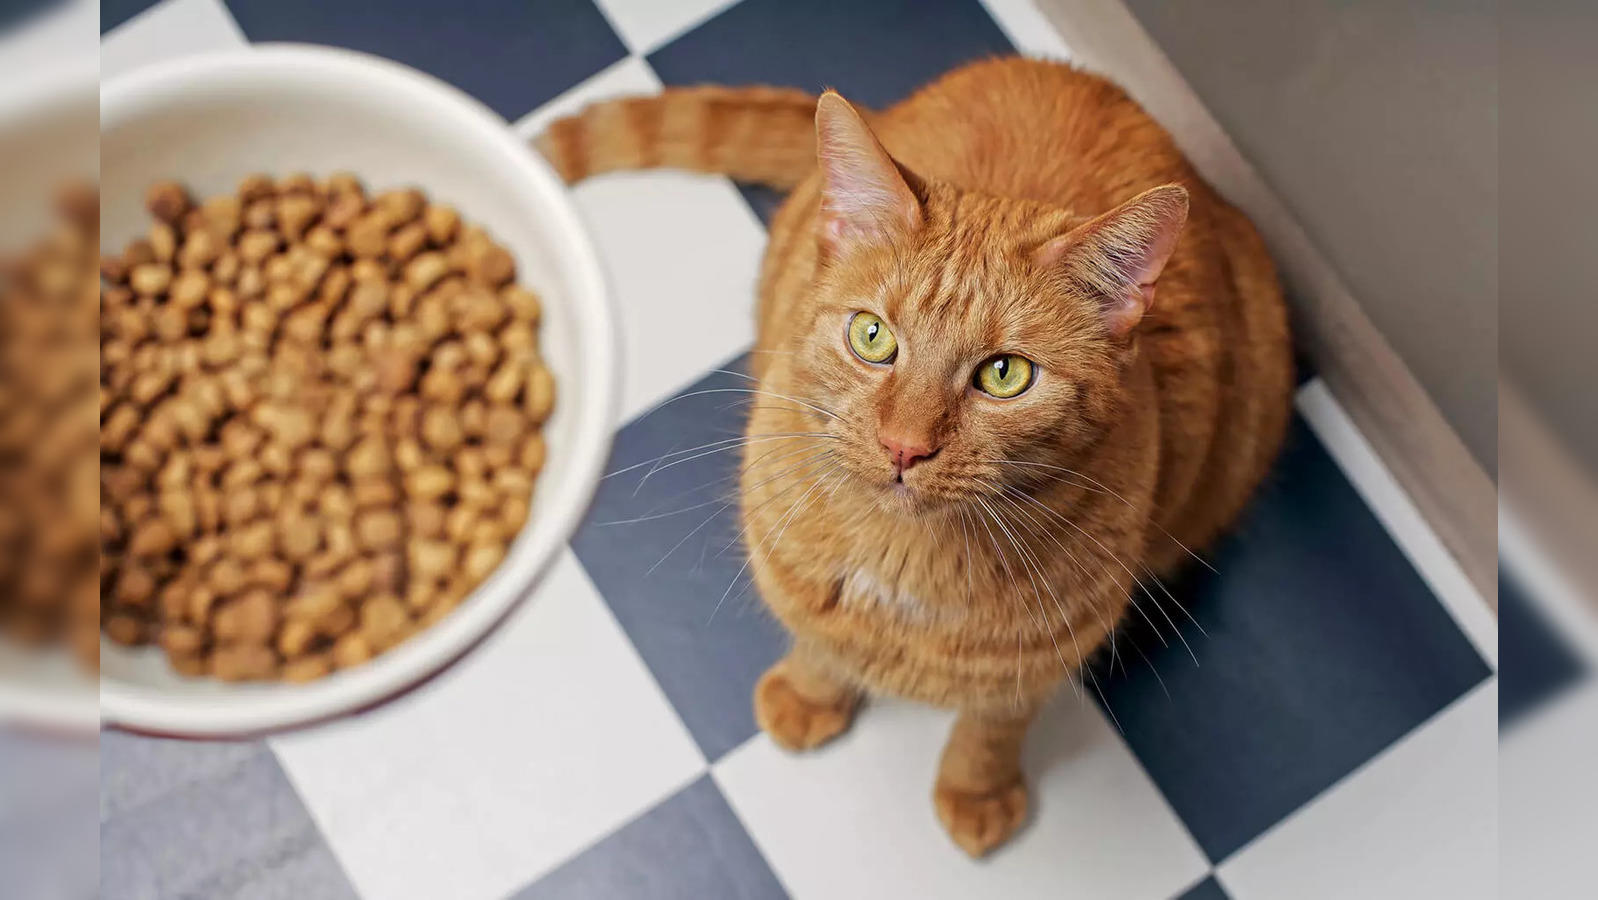 Cat Food: Irresistible and Best Cat Food That Pampers, Nourishes and  Satisfy Your Feline's Every Craving - The Economic Times